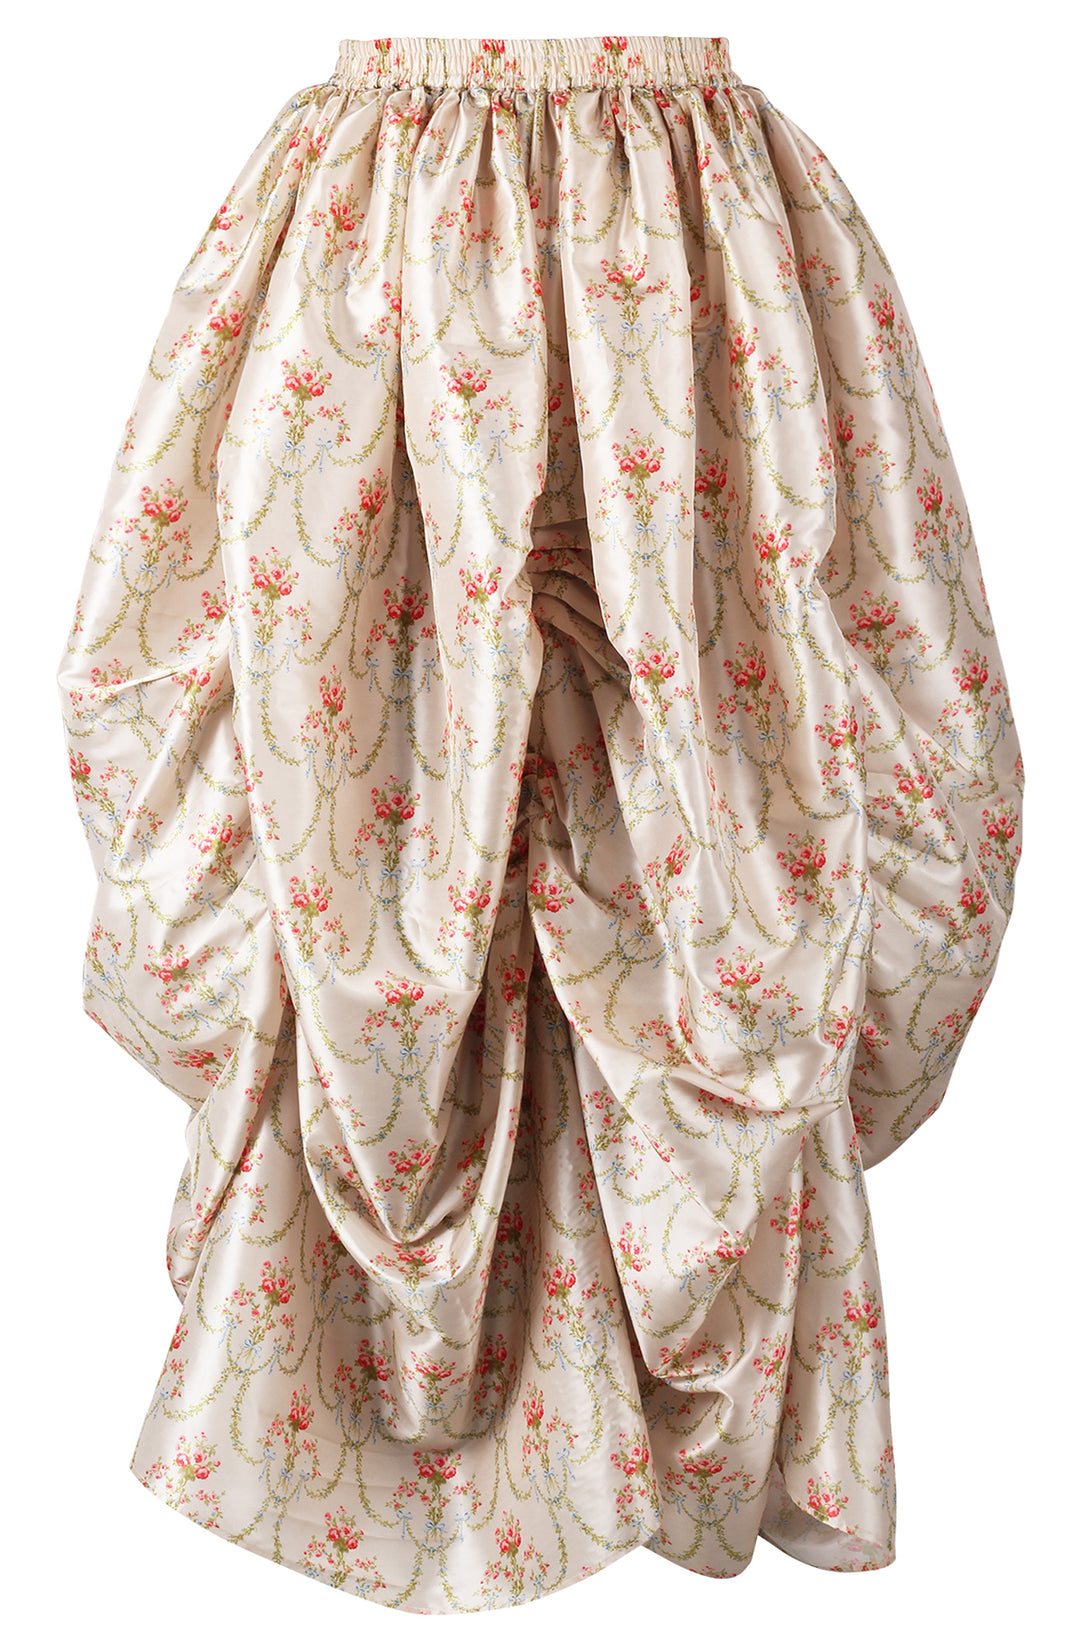 Floral Ball Gown Skirt - French Petit Garden 2